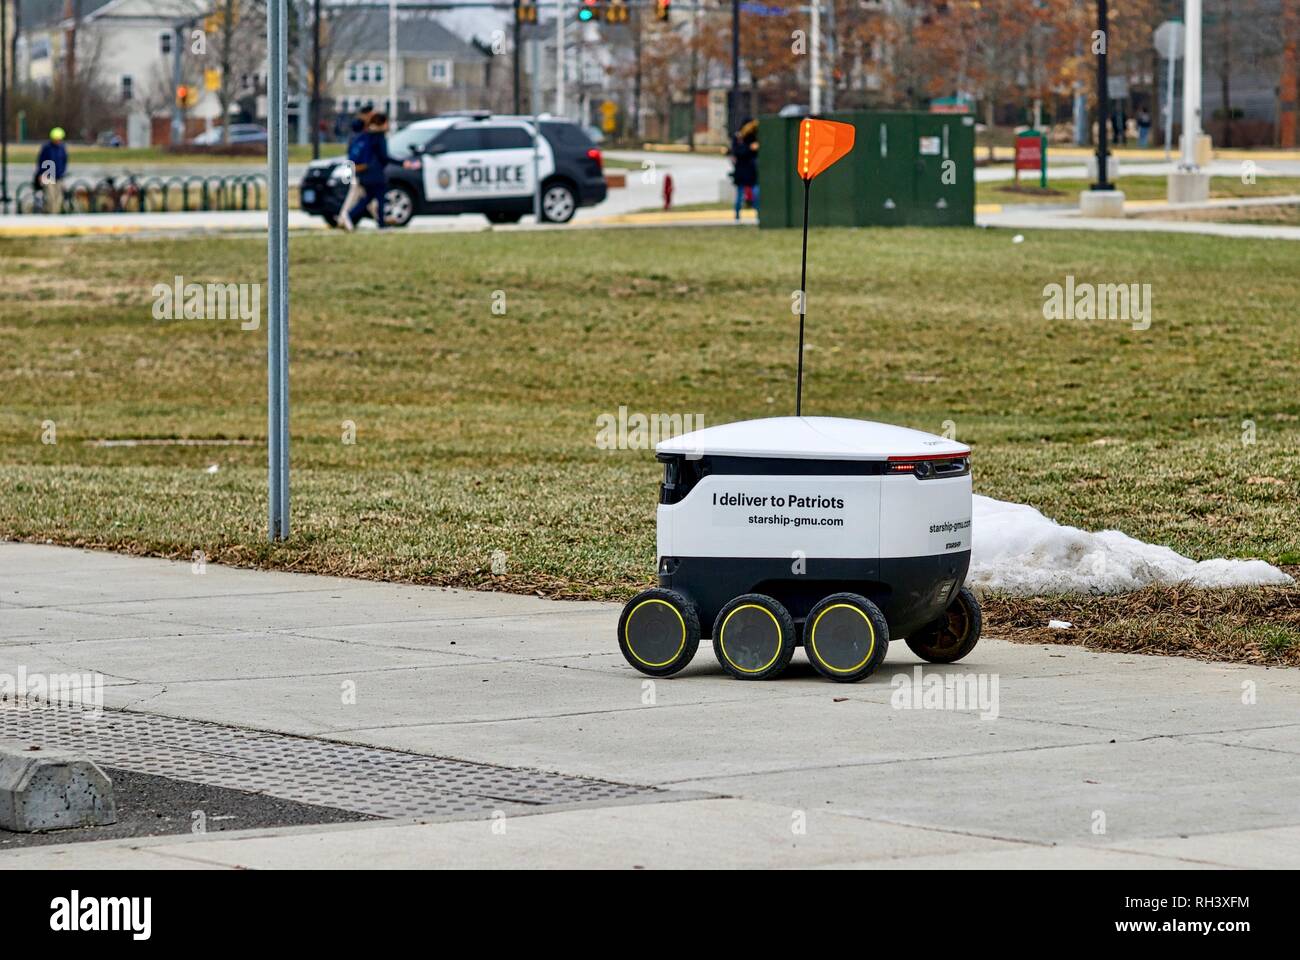 Fairfax, Virginia, USA - January 29, 2019: An autonomous food delivery robot travels enroute to a customer on George Mason University's main campus. Stock Photo